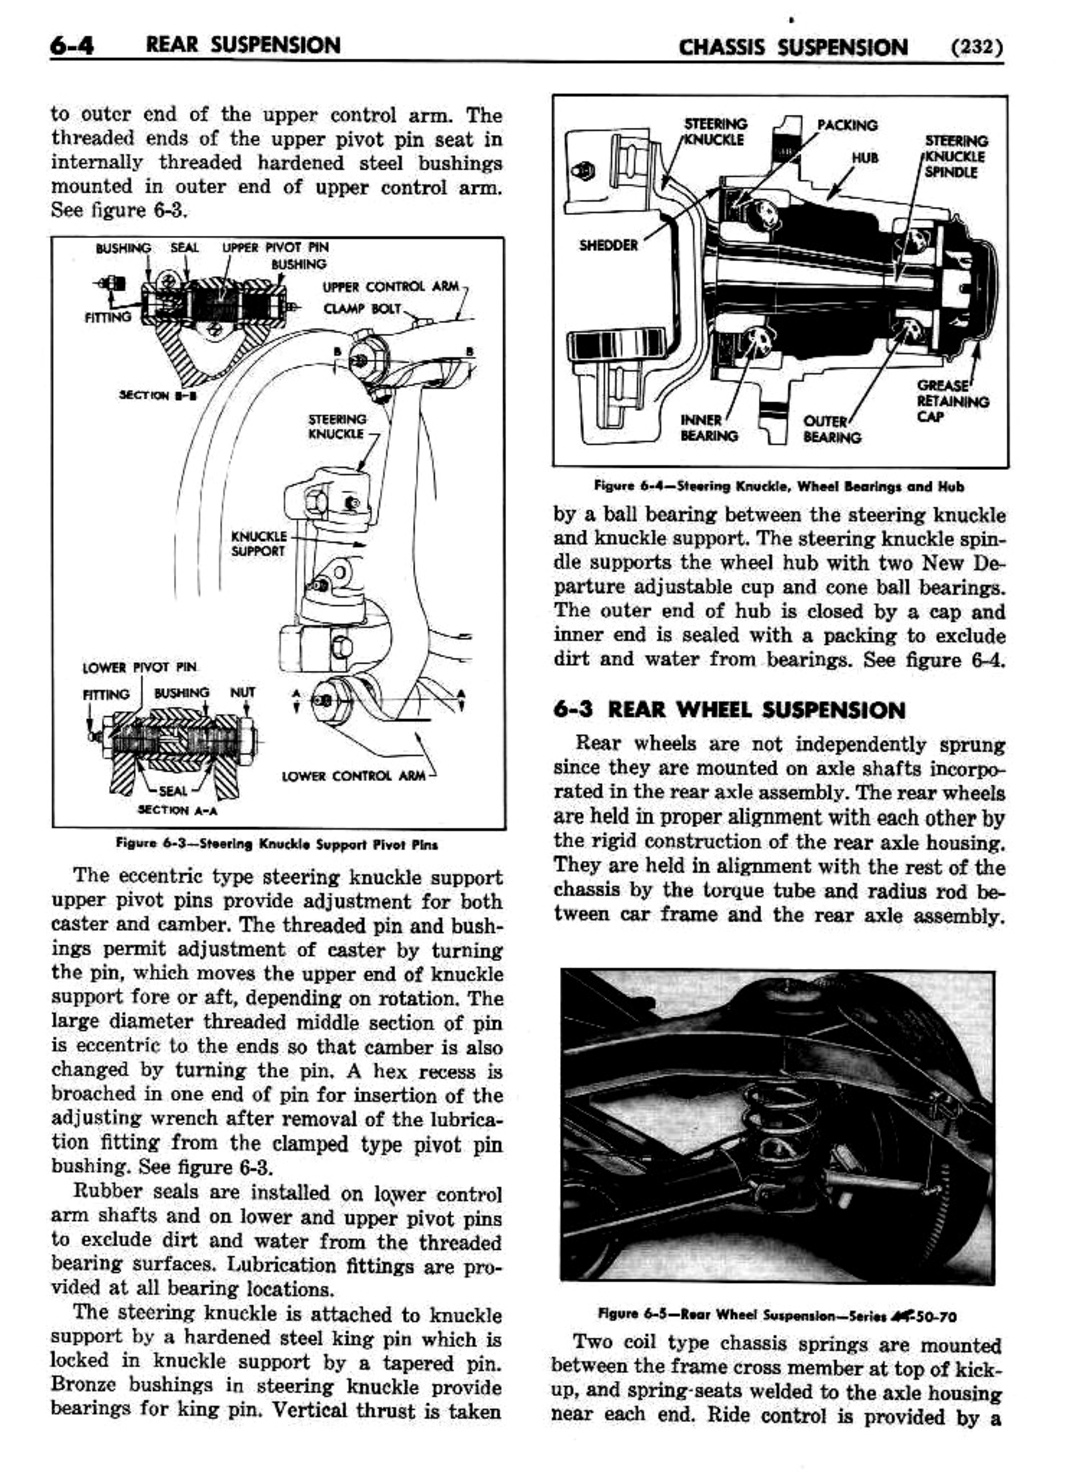 n_07 1951 Buick Shop Manual - Chassis Suspension-004-004.jpg